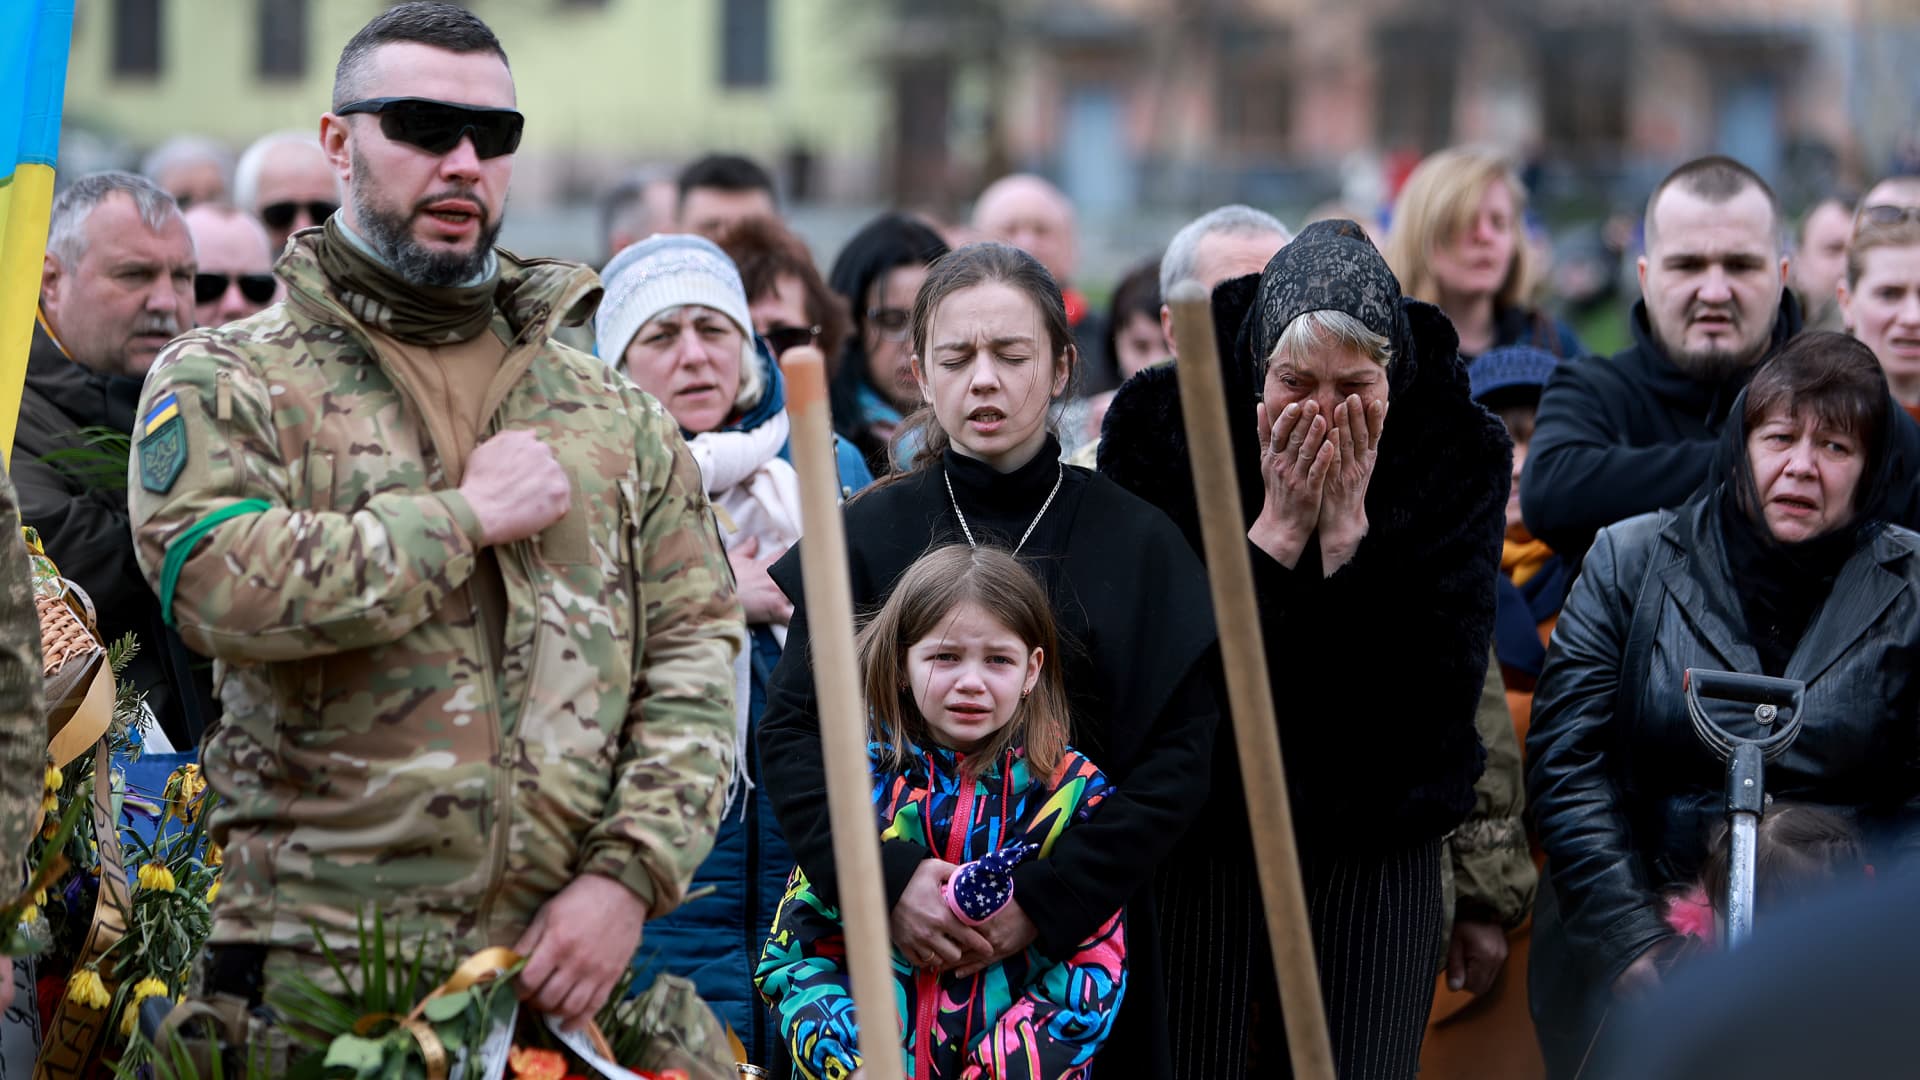 On April 17, a mother holds her daughter at the funeral of her husband, a Ukrainian soldier killed in the Donbas area of Ukraine. Moscow is refocusing its attacks on Donbas.